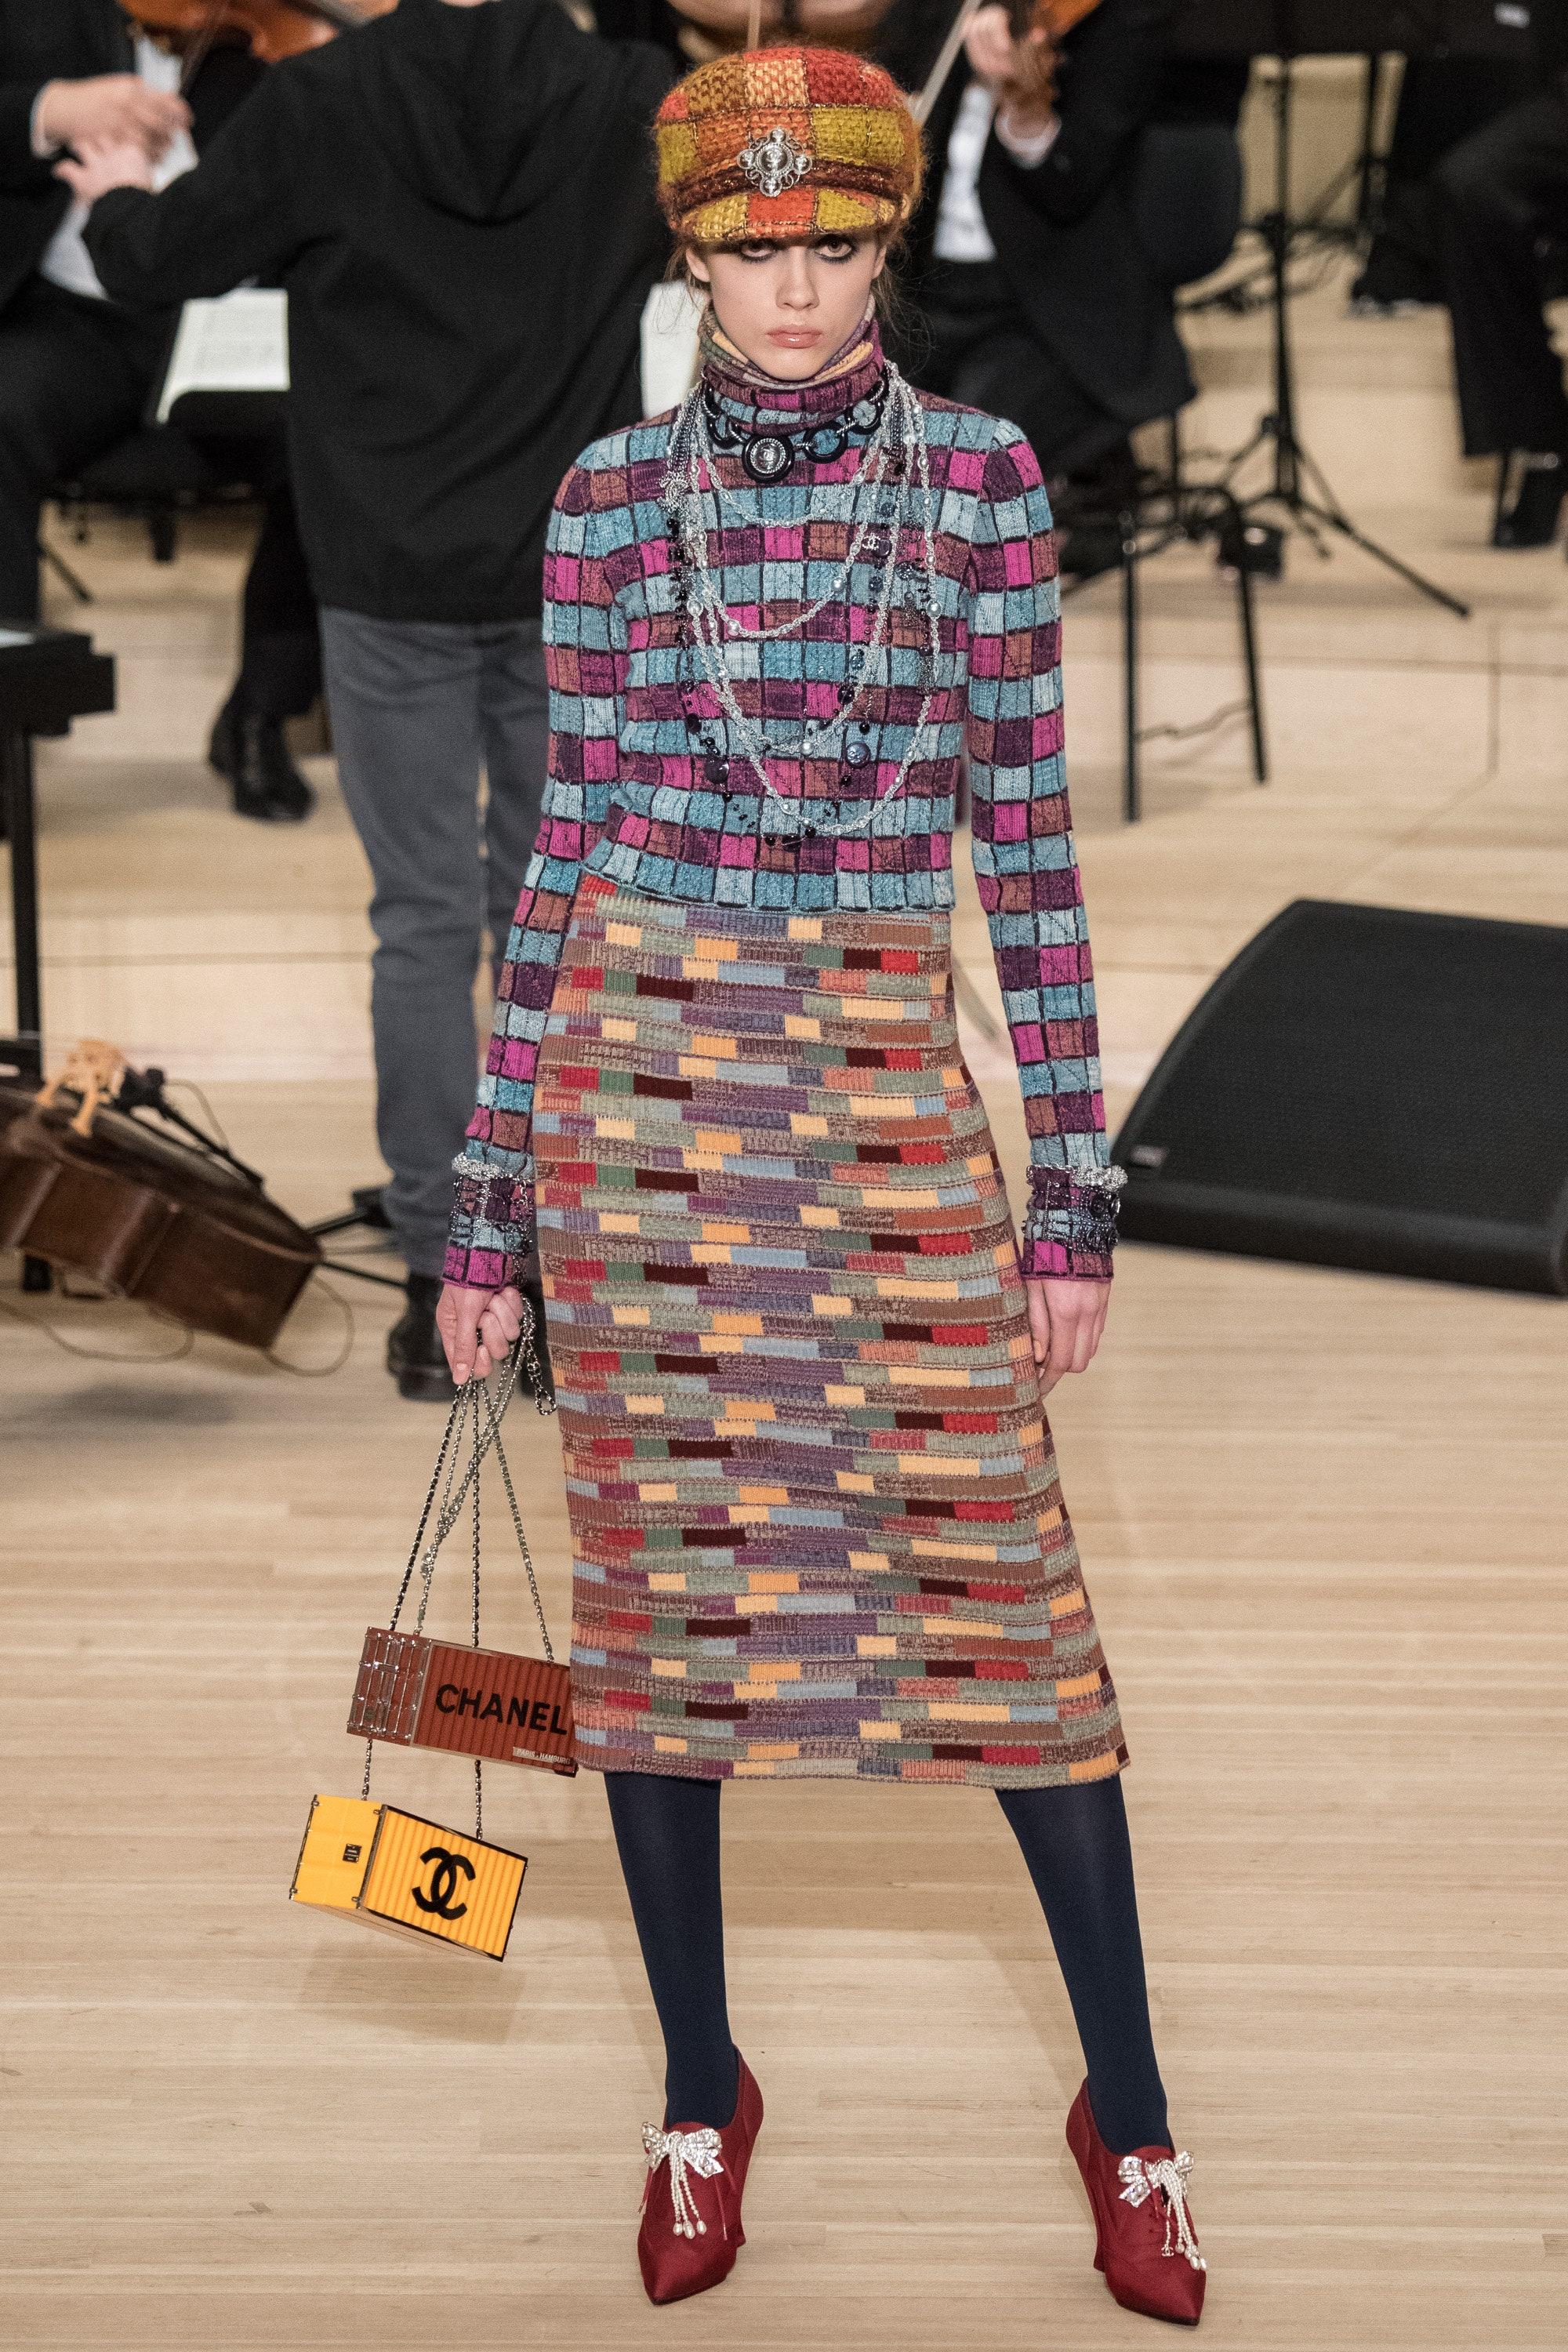 Iconic “bricks” cashmere dress from Runway of Paris / HAMBURG Metiers d’Art Collection , 2018 Pre-Fall Metiers d'Art
As seen on Jennifer Lopez
Colors like a masterpiece 
- CC logo charm at waist
Size mark 42 fr
Condition: Never worn!